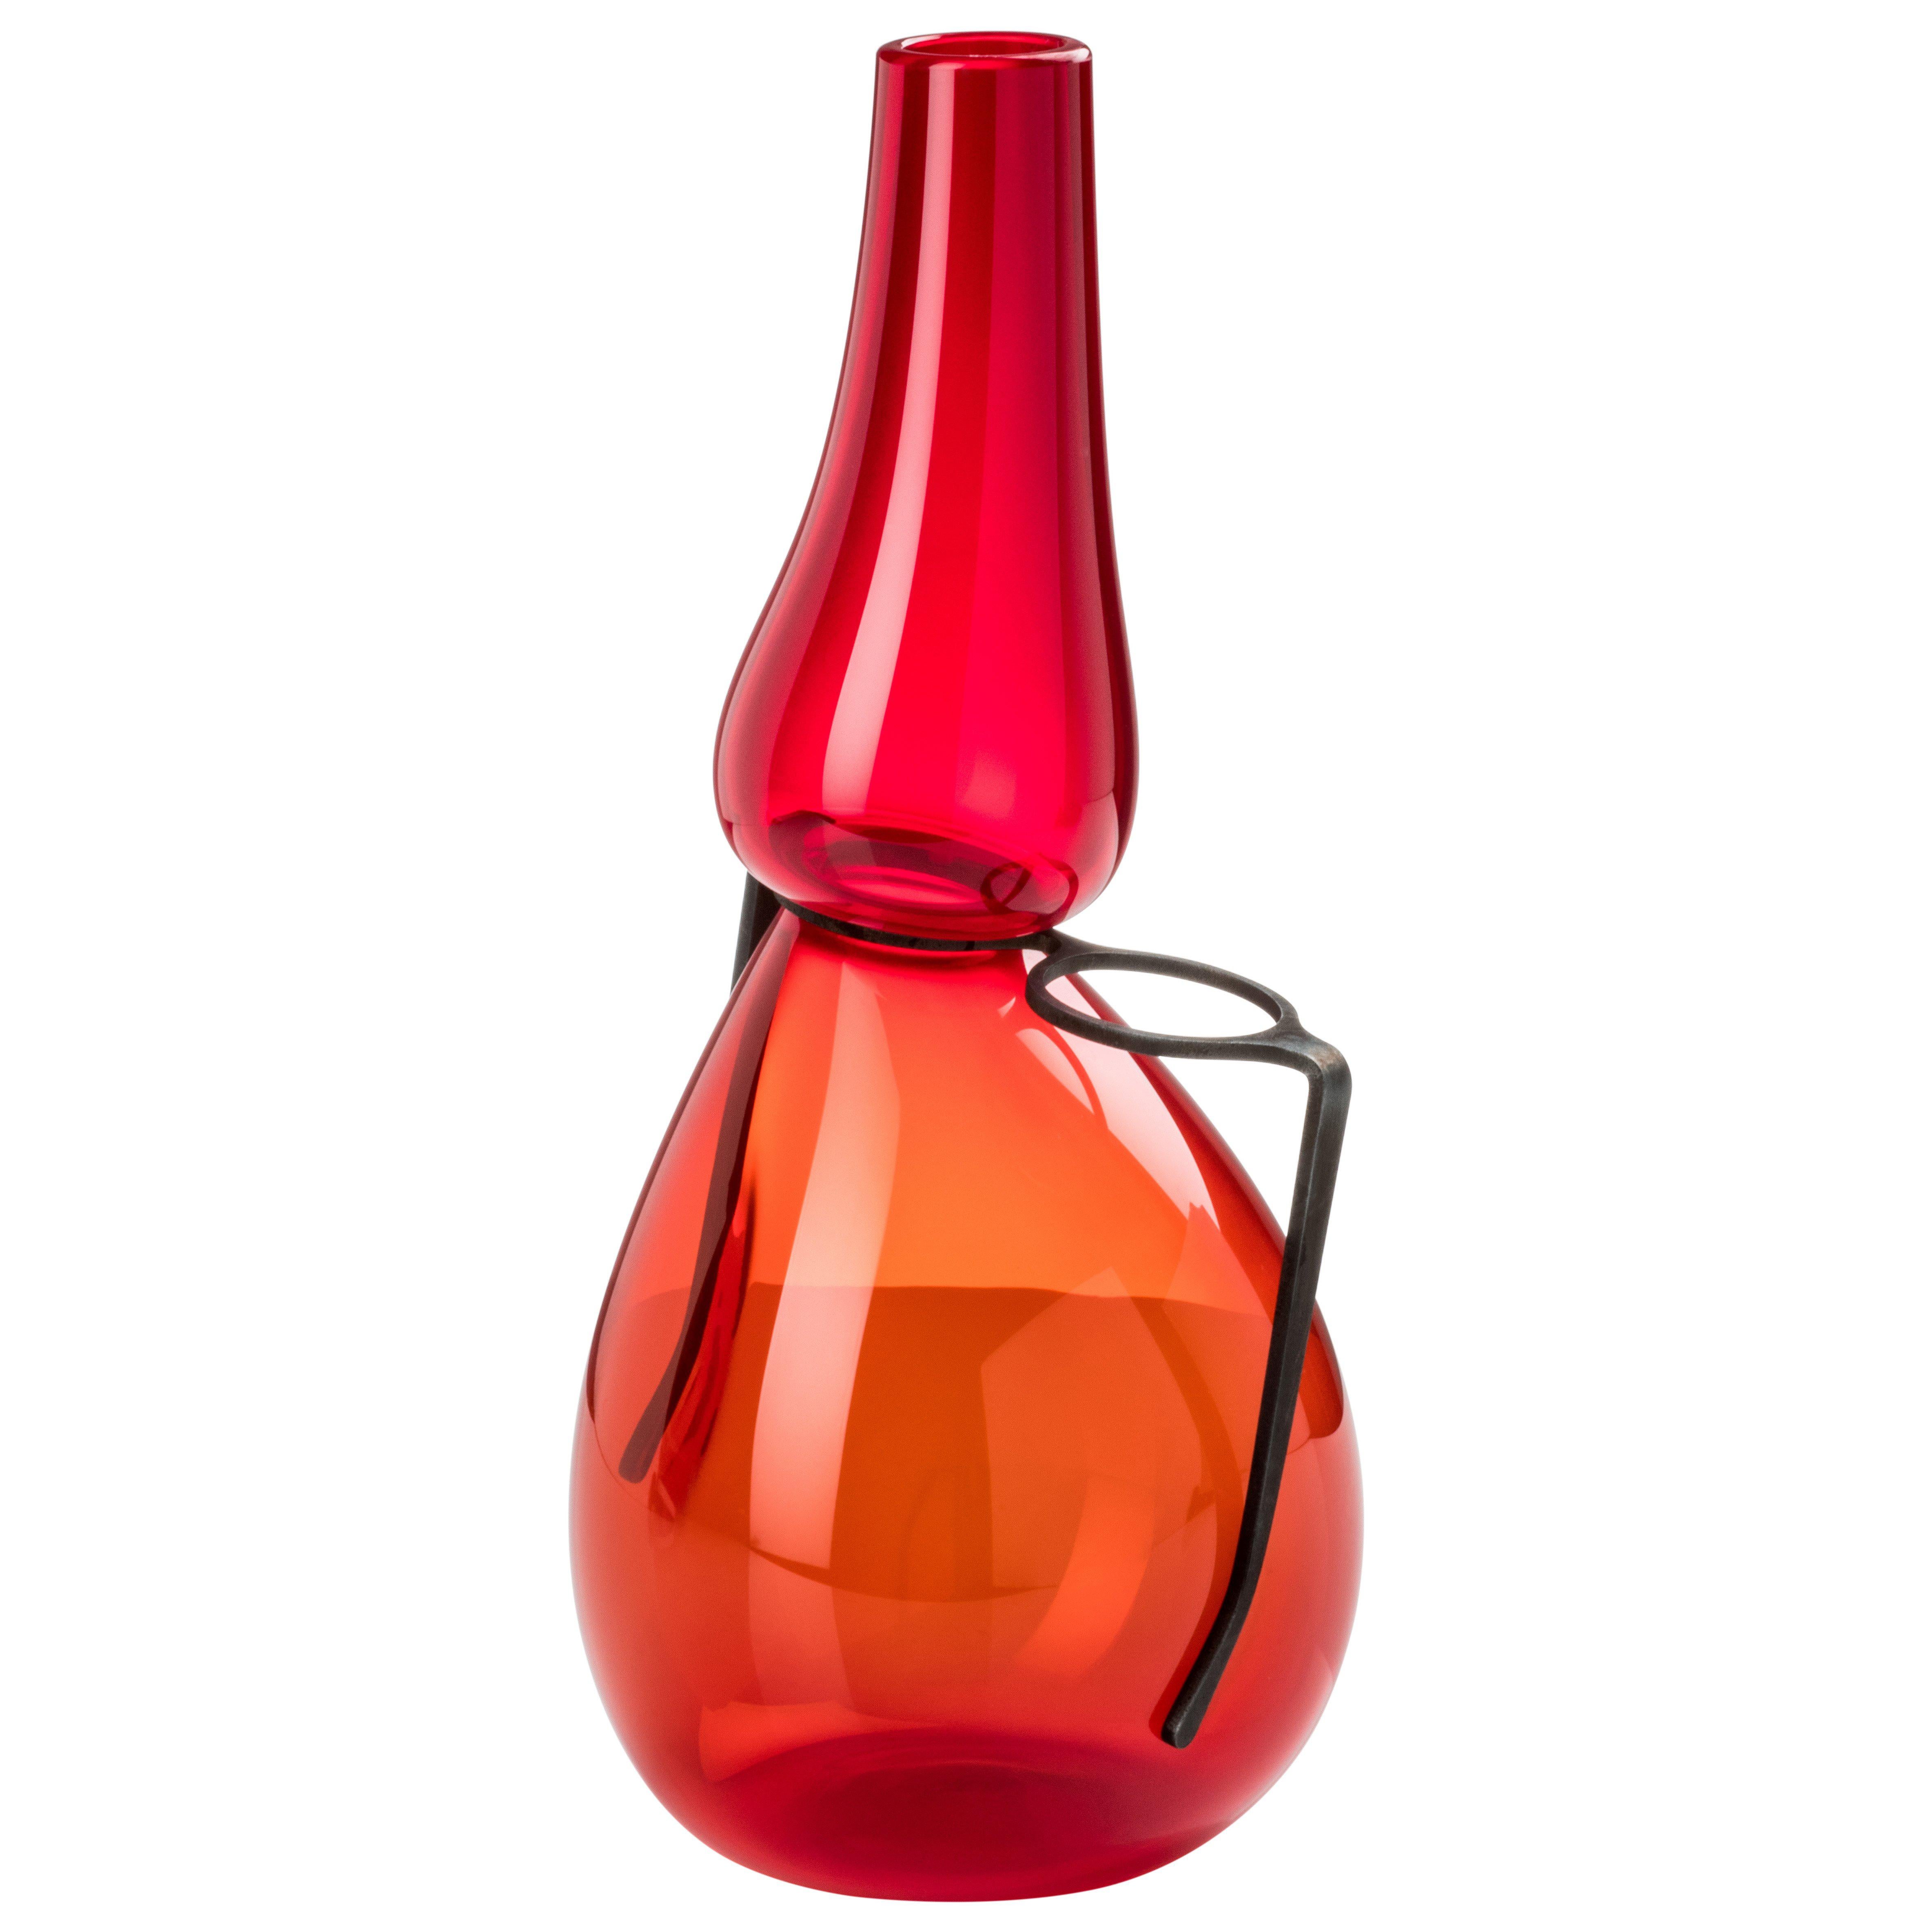 Venini 'Where Are My Glasses?' Single Lens Glass Vase in Red by Ron Arad